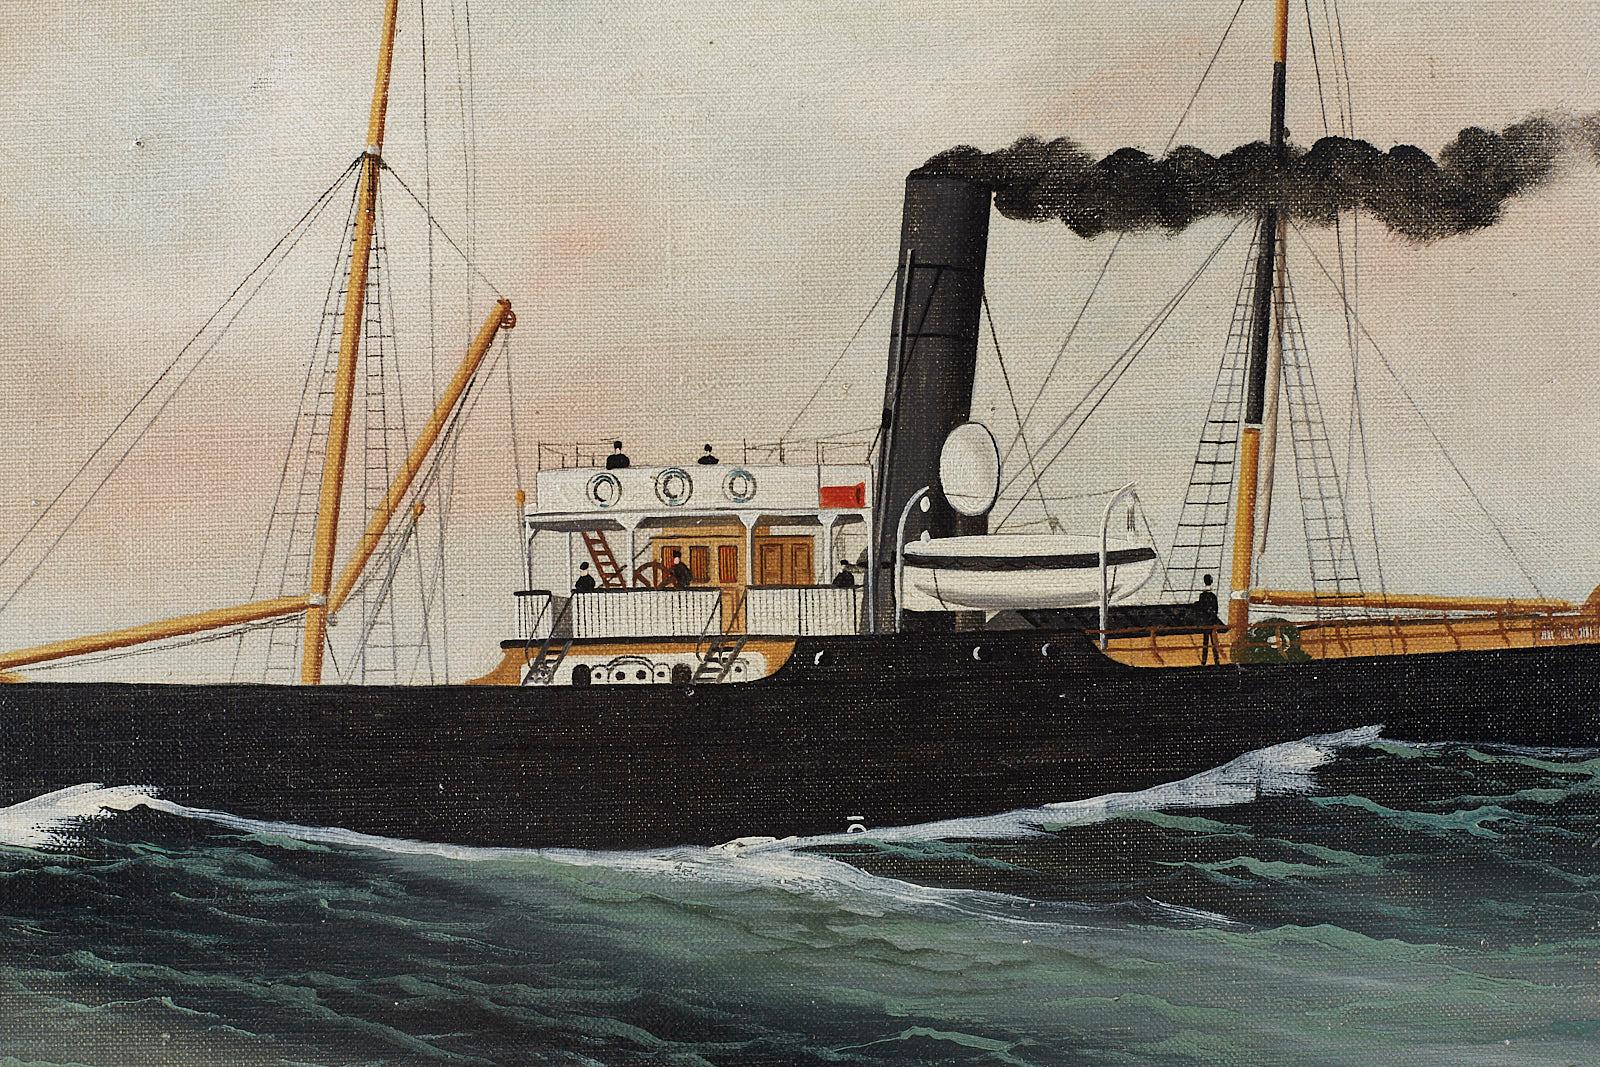 Glorious steamship painting by Alfred Jensen (German 1859-1935) depicting the Willy Alexander at sea flying the Belgium flag. The steamship was commissioned in 1879 and lost to gunfire in 1916. Exquisite detail signed lower right and dated 1909 with